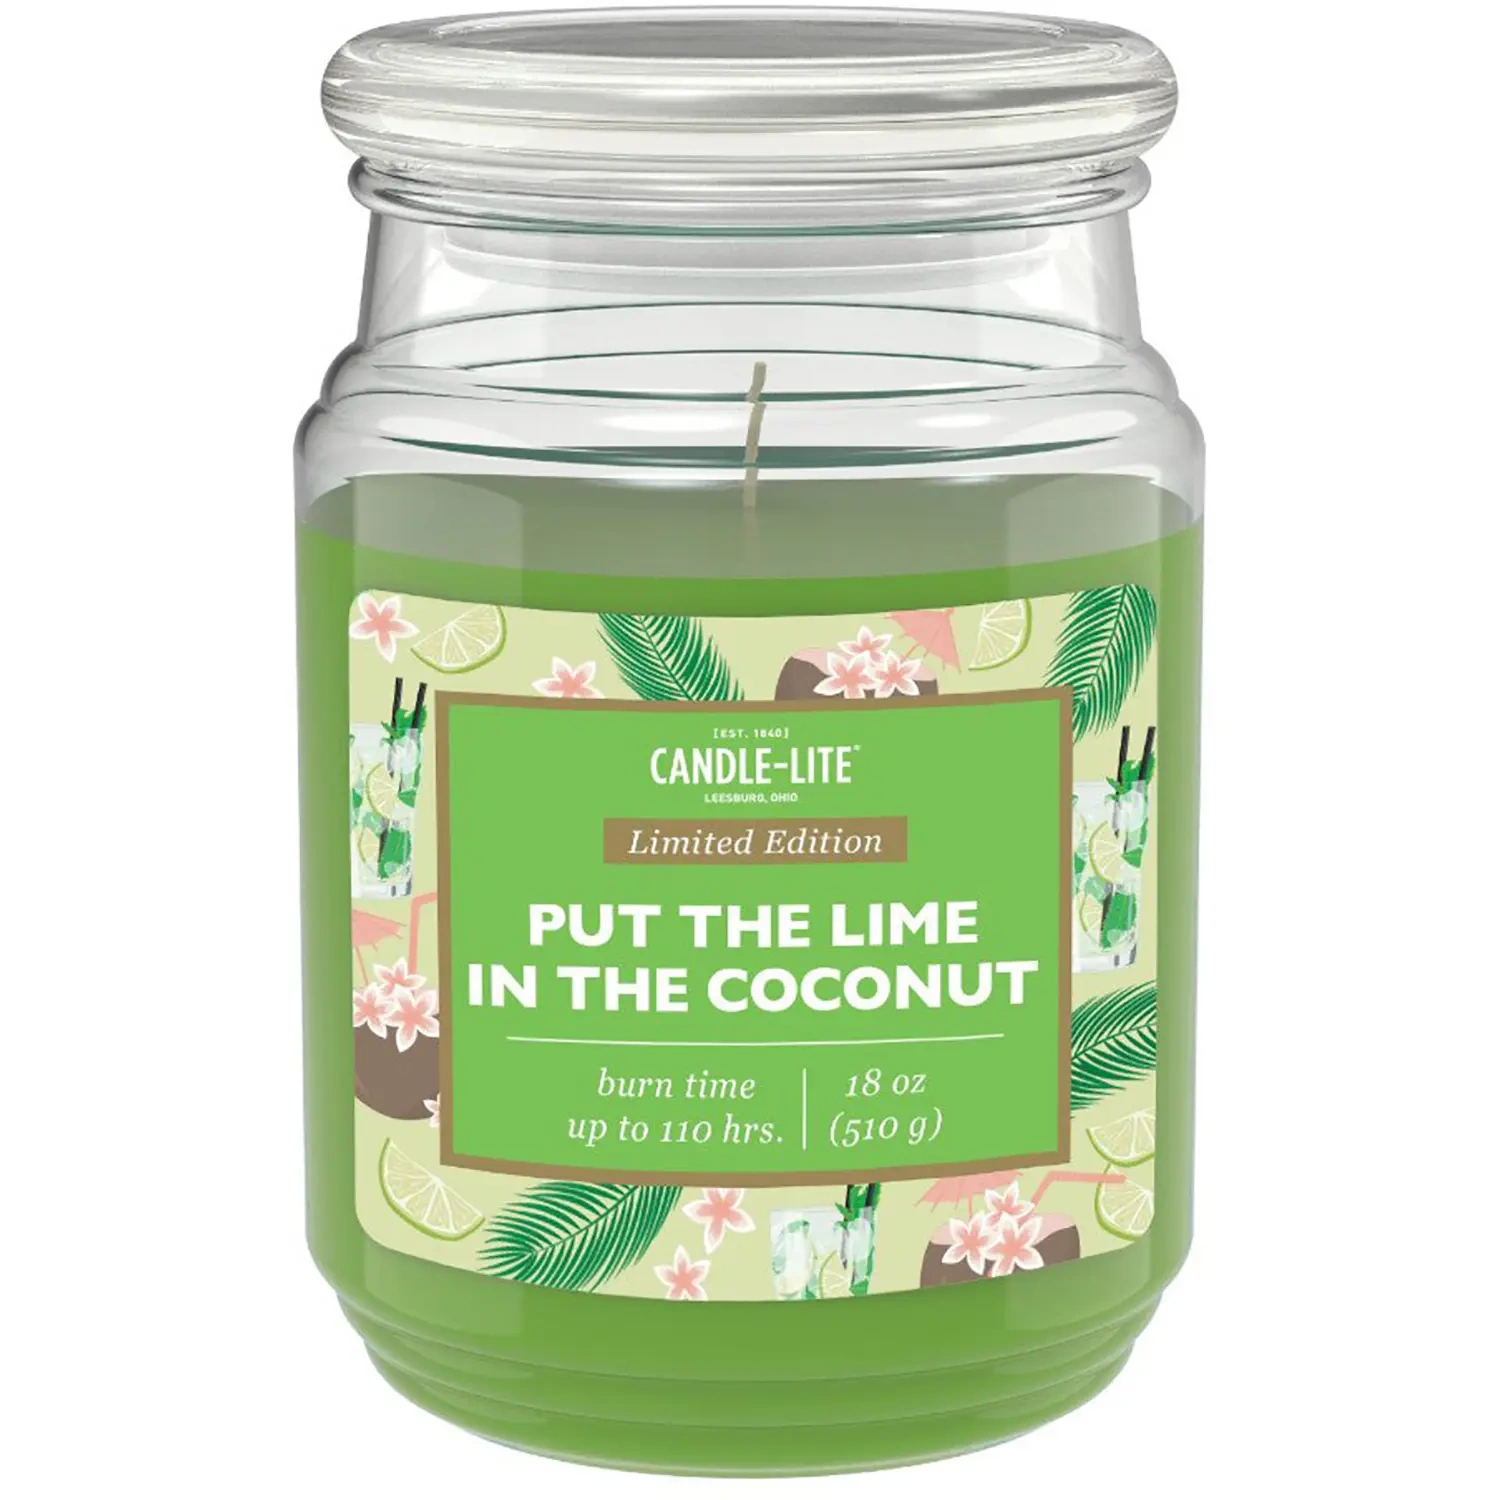 Put The Lime In The Coconut Kaars van Candle-lite